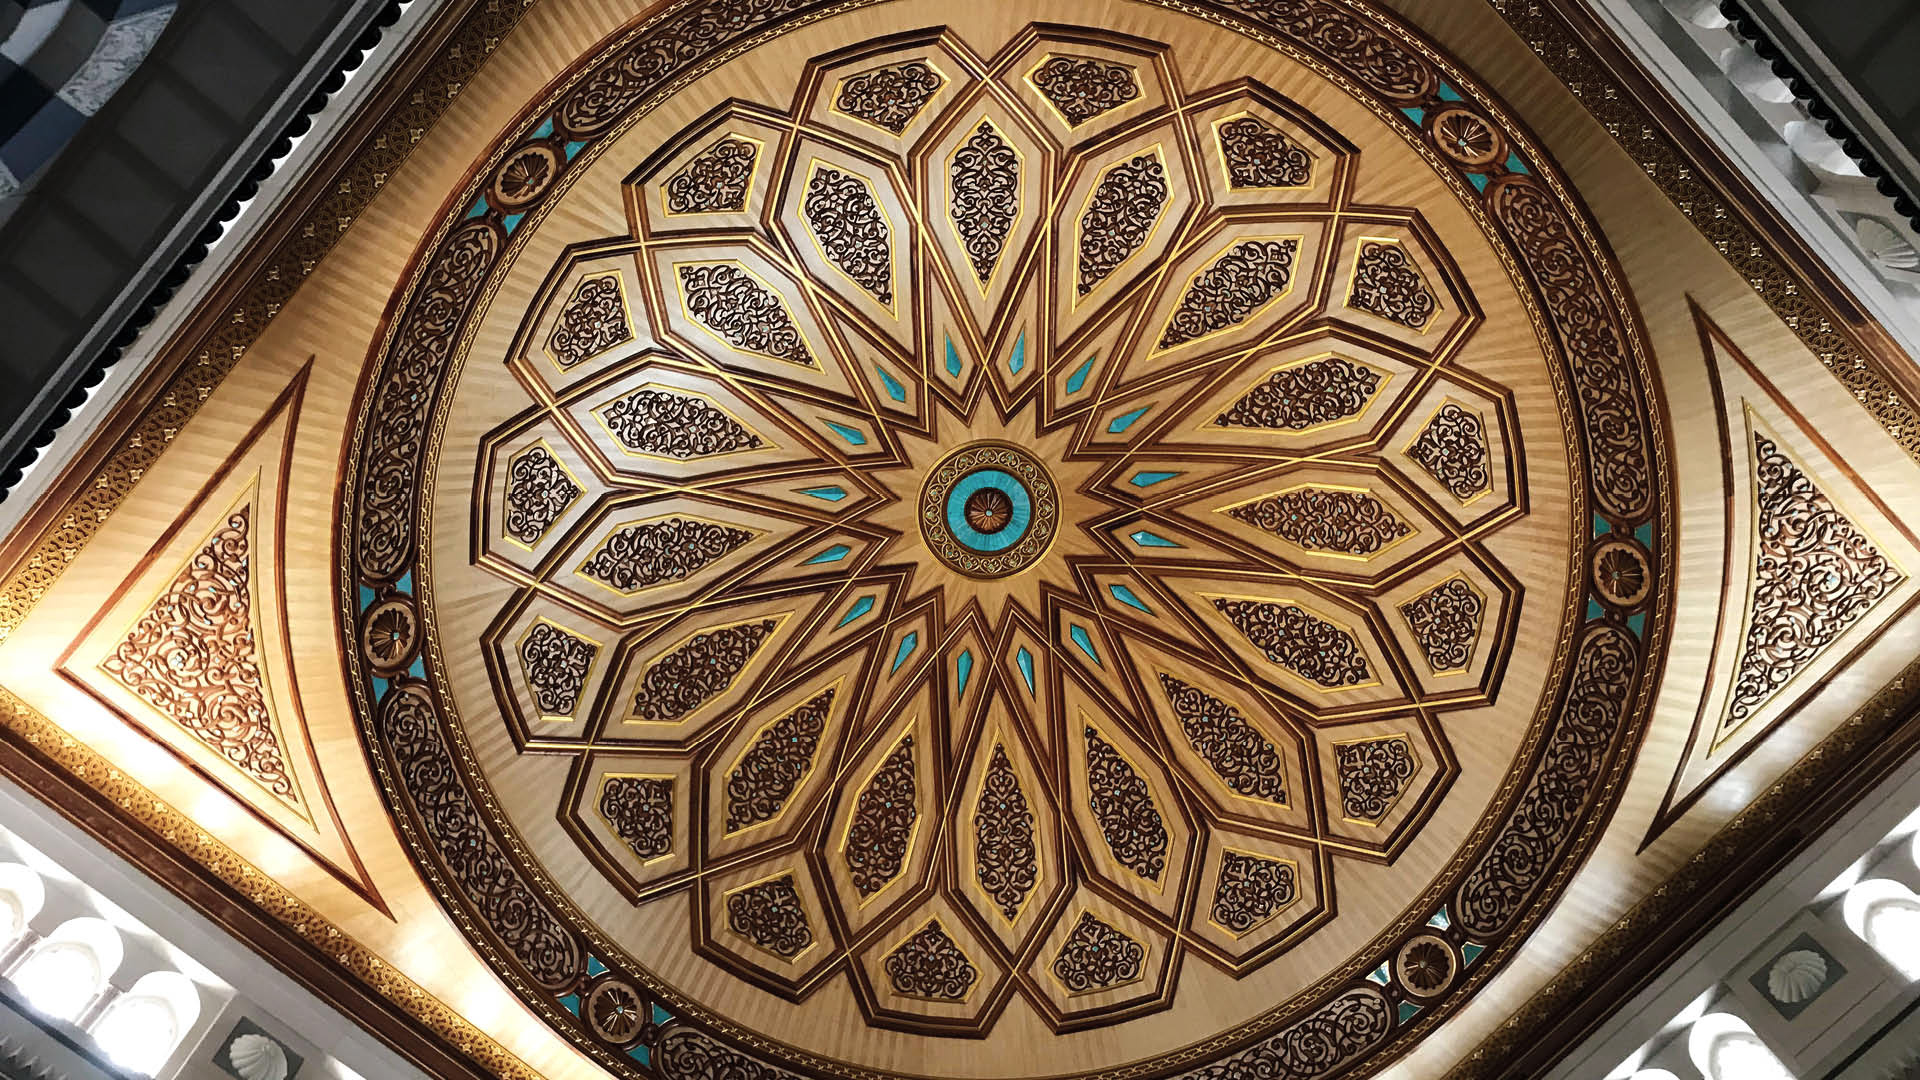 have you seen these movable domes in masjid nabawi?